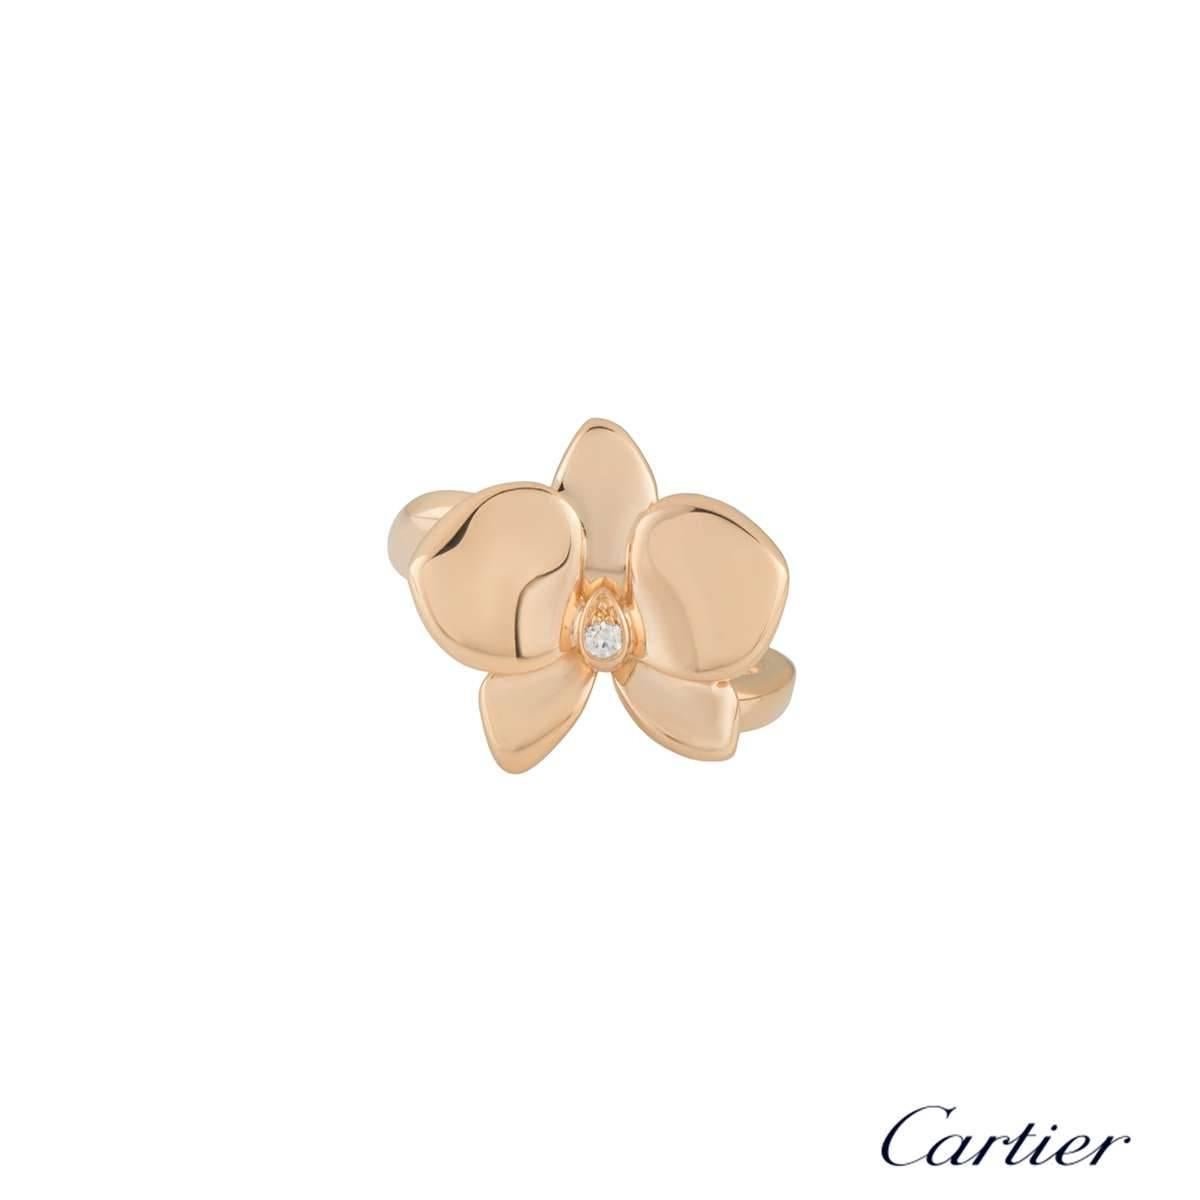 A beautiful 18k rose gold diamond Caresse D'Orchidées par Cartier ring. The ring comprises of an orchid motif with a round brilliant cut diamond in the centre. The diamond weighs 0.02ct, G colour and VS+ clarity. The ring is a US size 6, UK size M